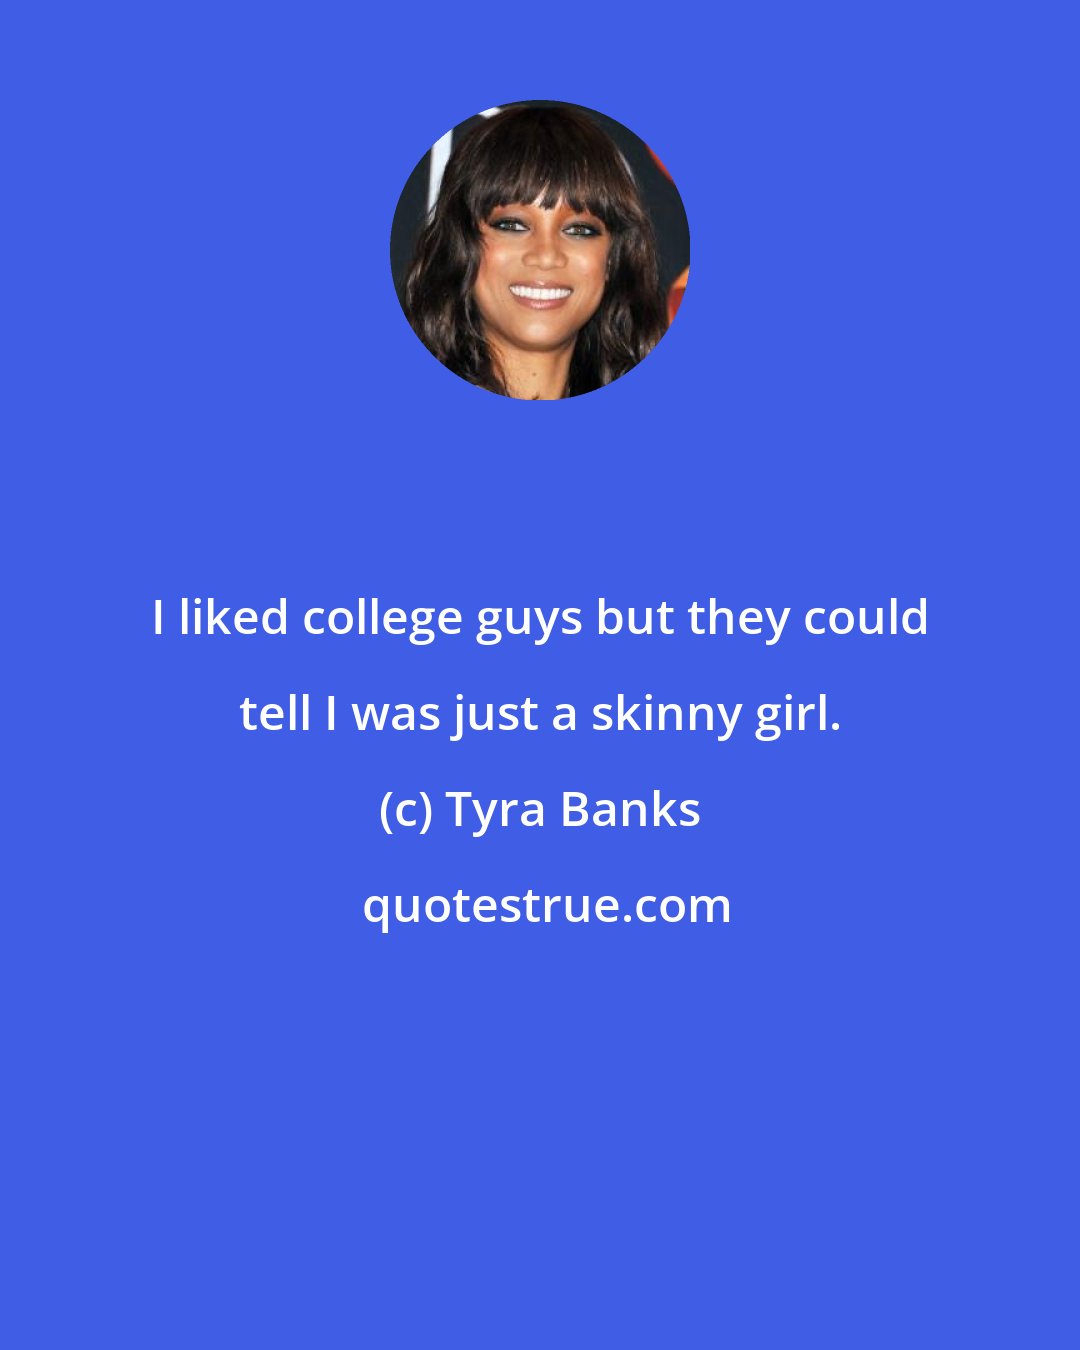 Tyra Banks: I liked college guys but they could tell I was just a skinny girl.